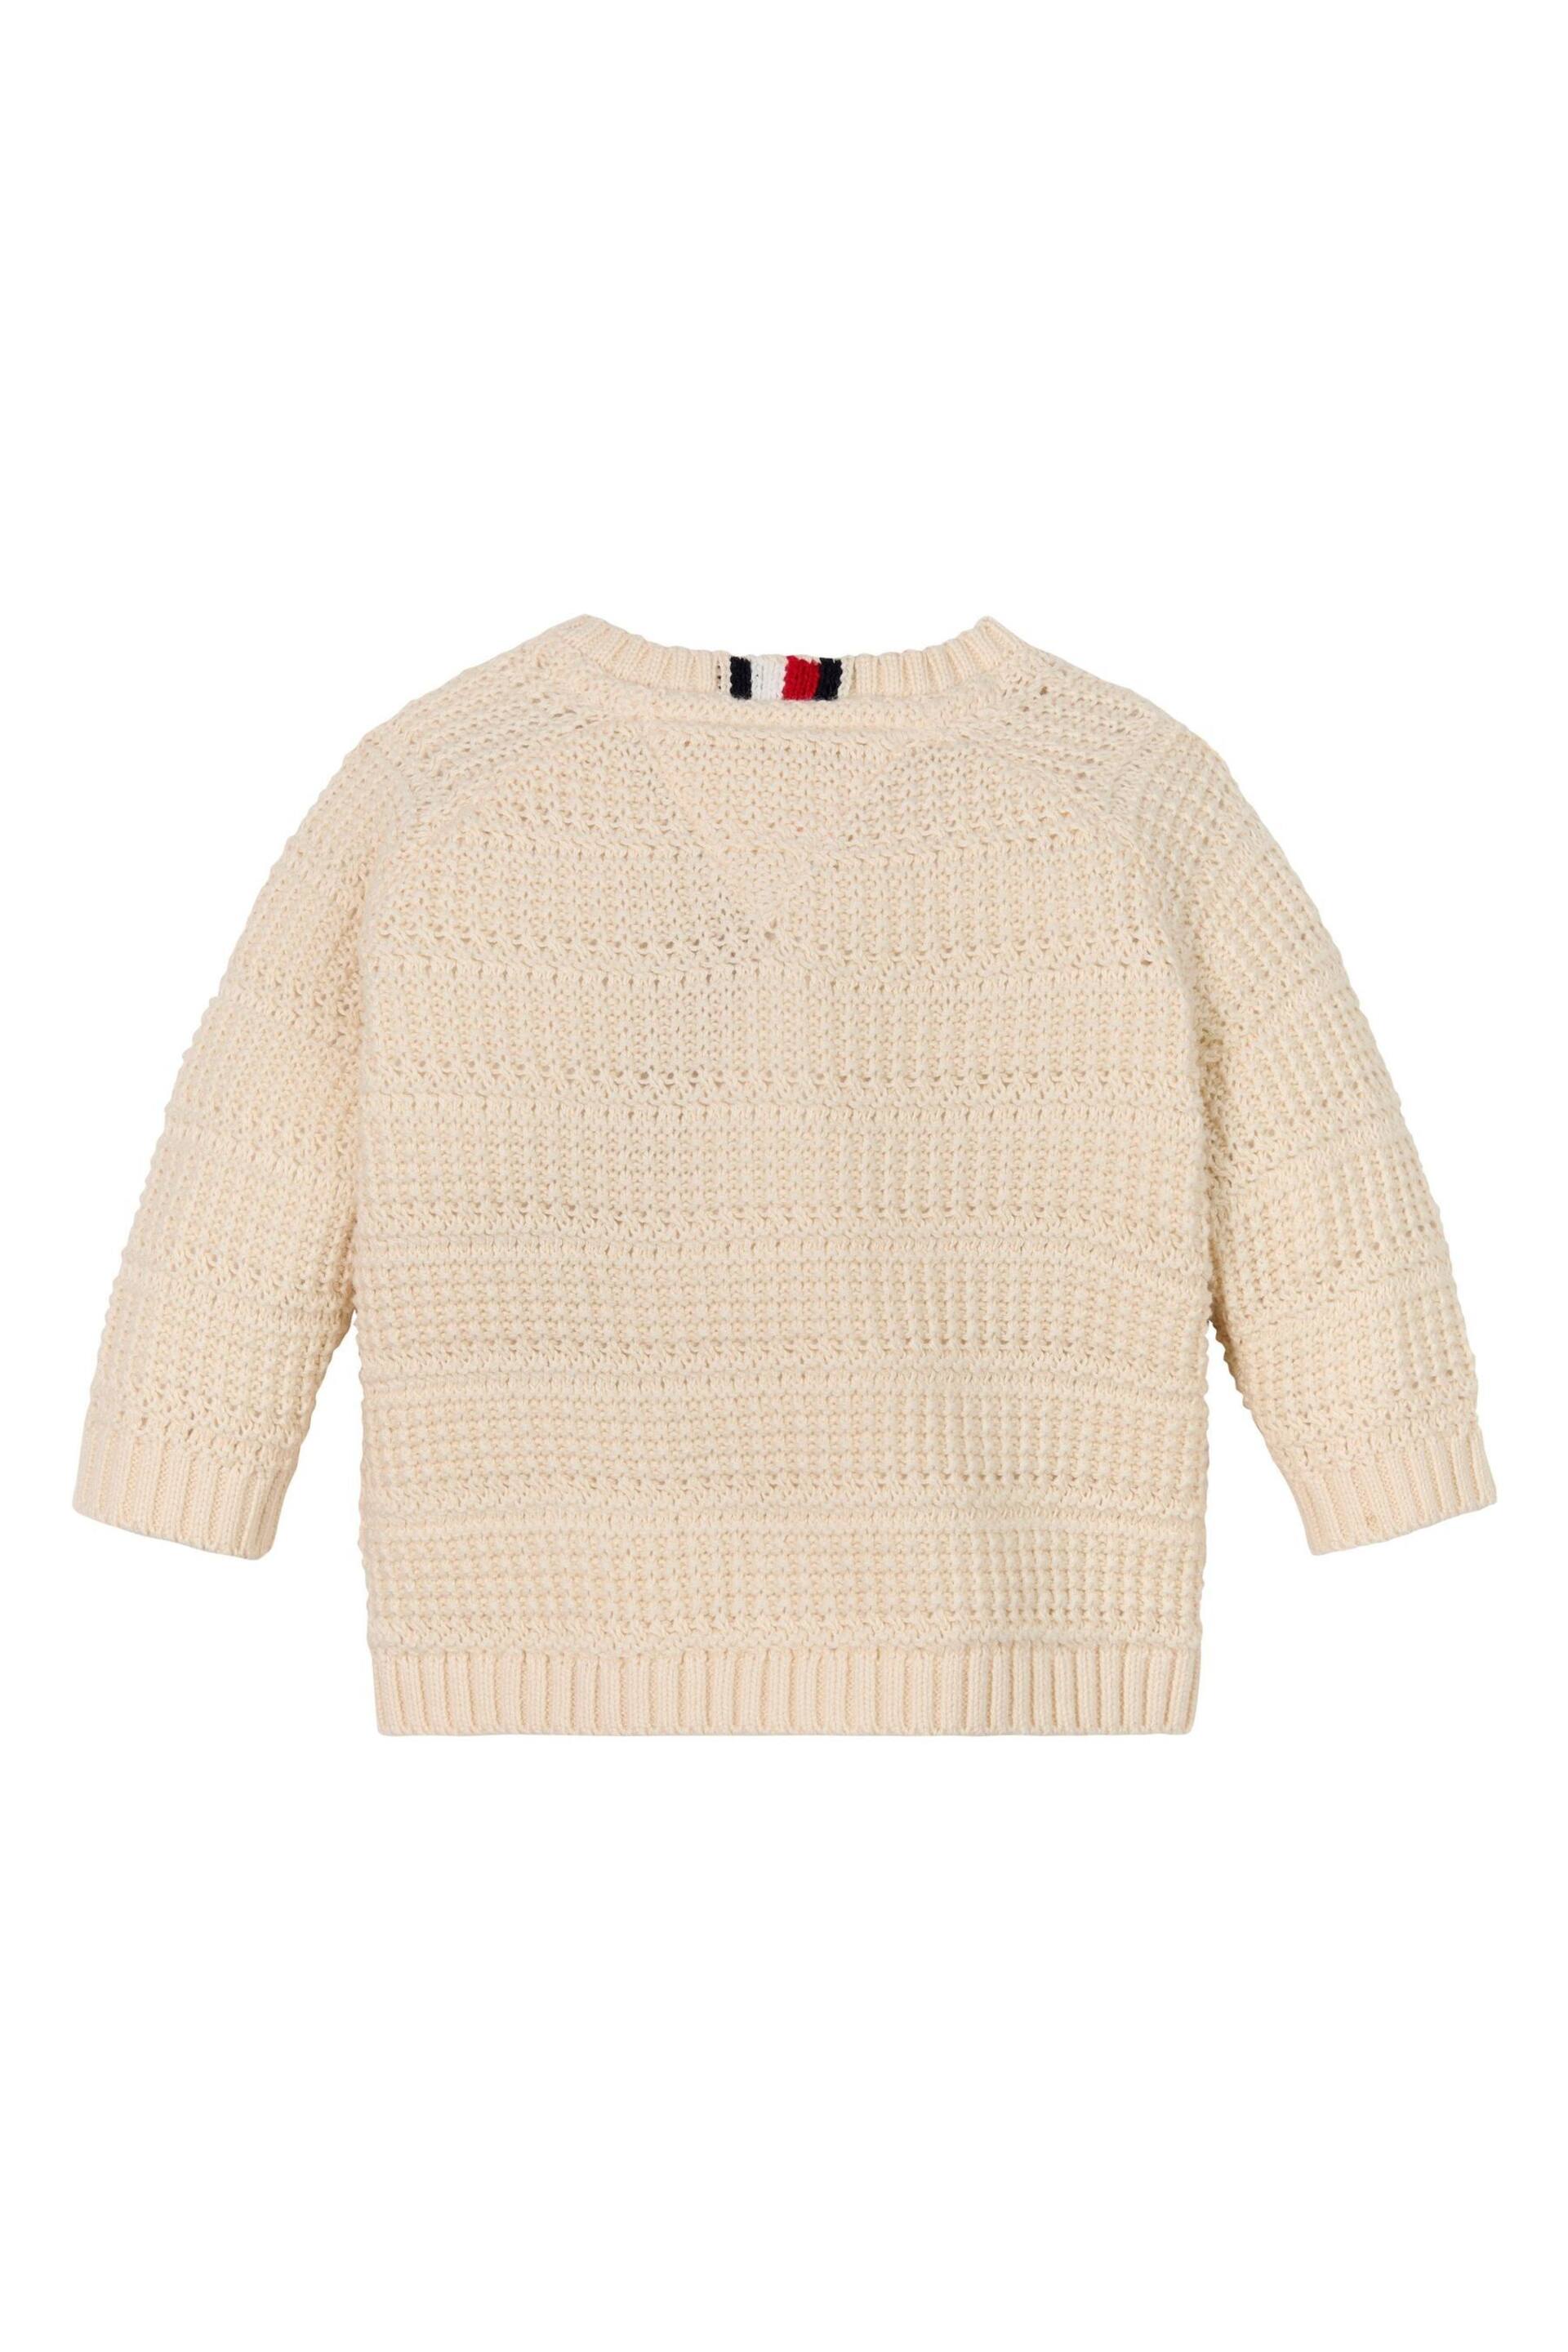 Tommy Hilfiger Baby Structured Cream Cardigan - Image 2 of 2